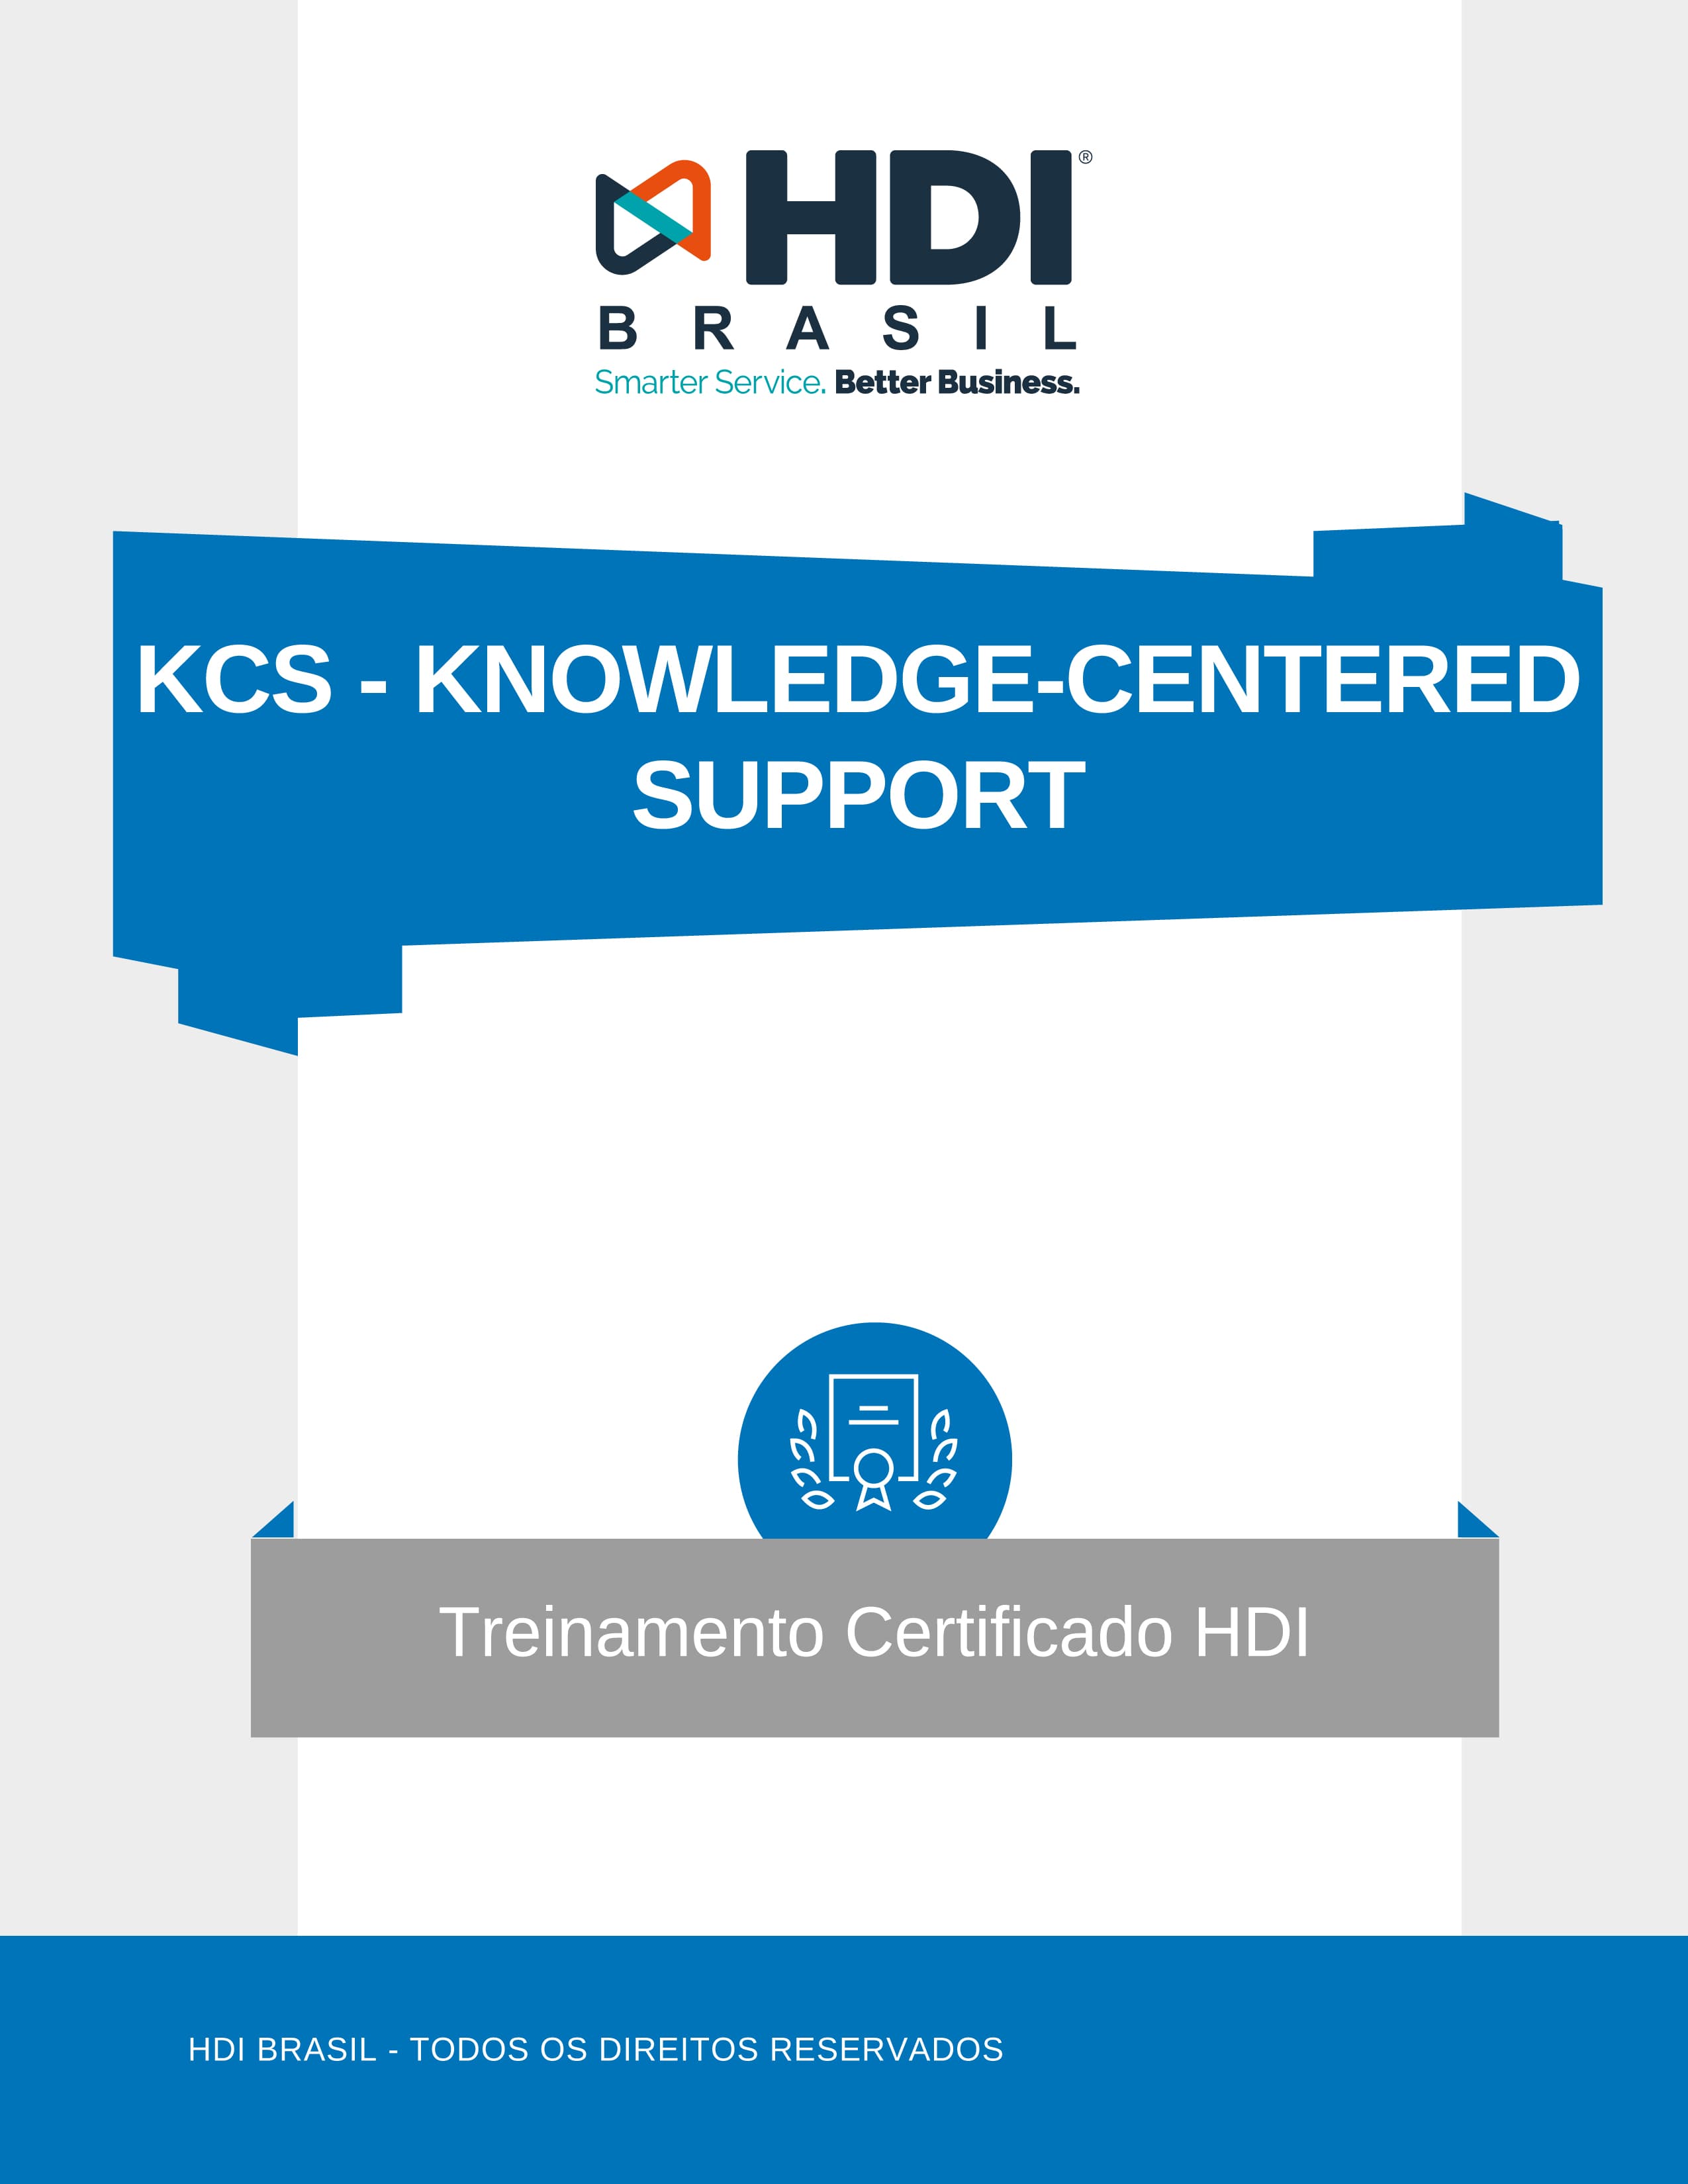 KCS - KNOWLEDGE-CENTERED SUPPORT